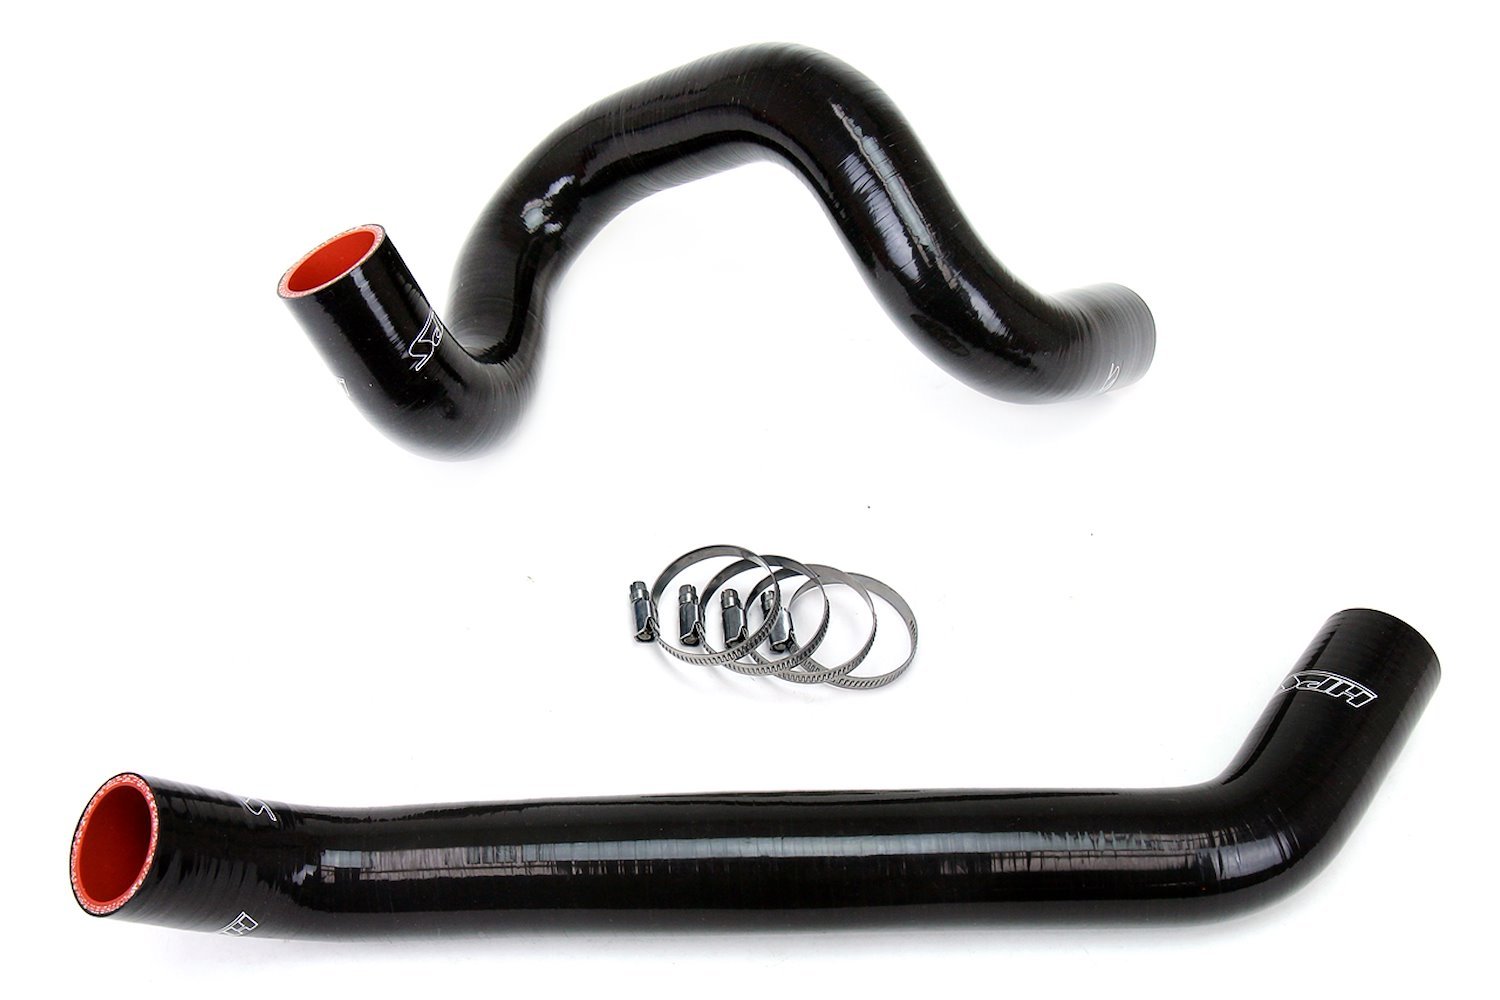 57-1220R-BLK Radiator Hose Kit, High-Temp 3-Ply Reinforced Silicone, Replace OEM Rubber Radiator Coolant Hoses